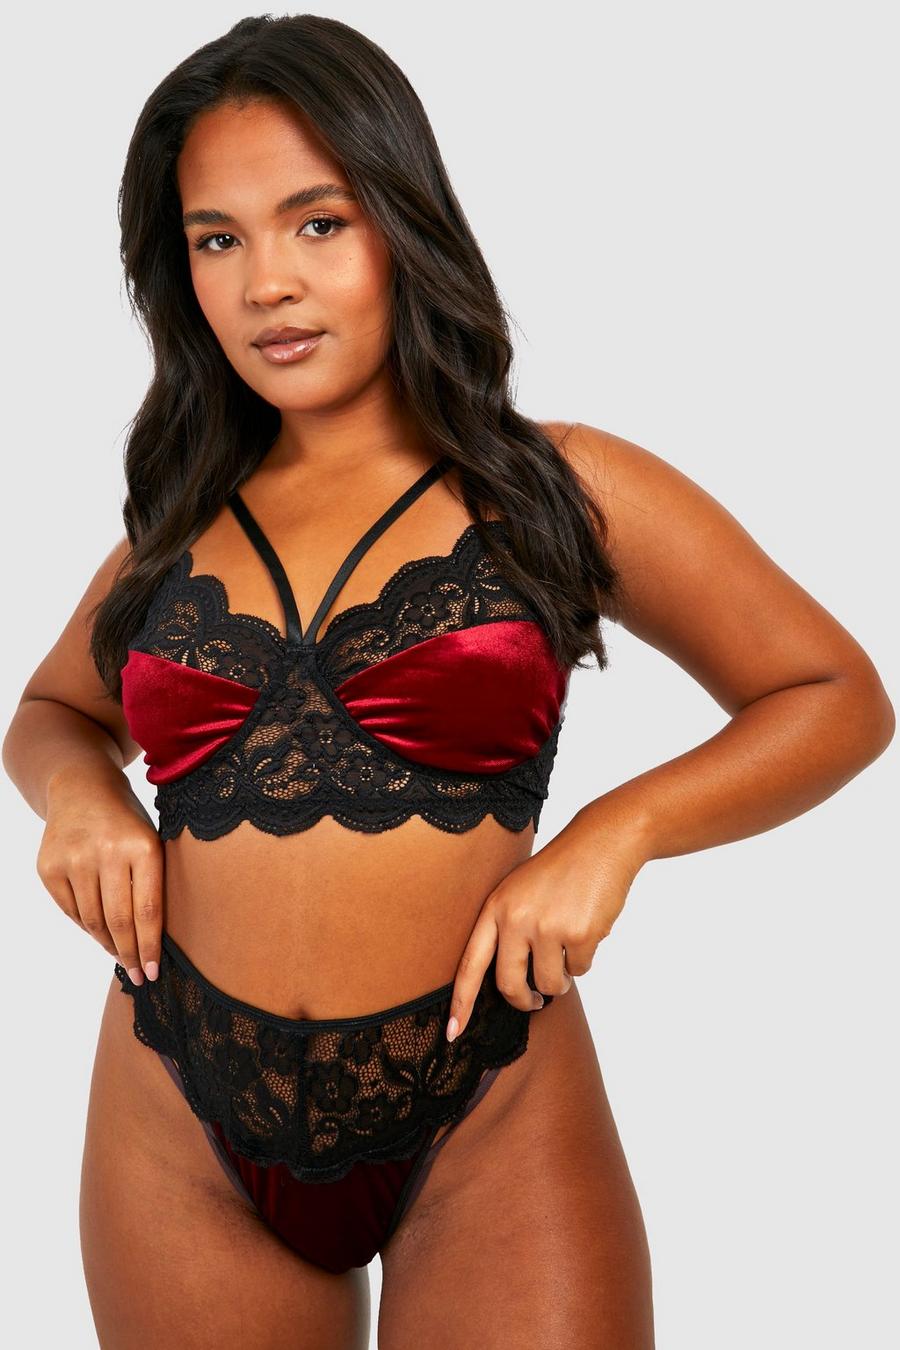 Plus 3 Piece Strapping Lingerie Set